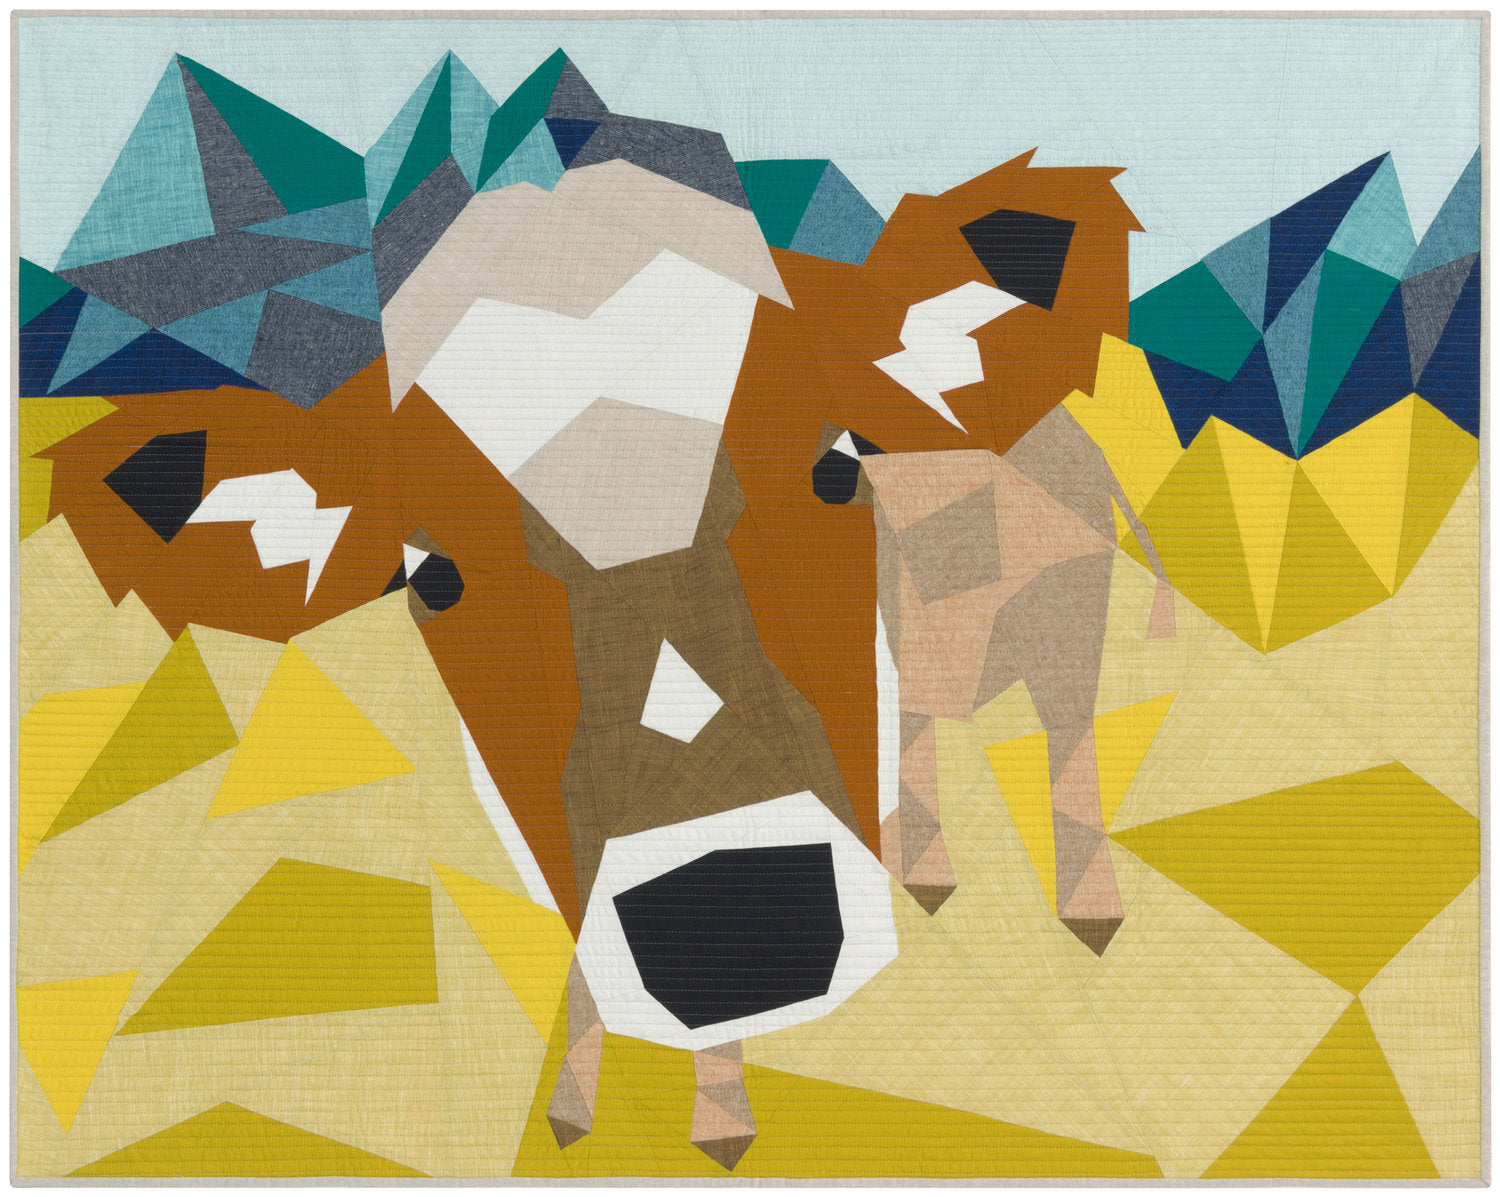 The Cow Abstractions 54-Inch x 42-Inch Foundation Paper Pieced Quilt Pattern by Violet Craft